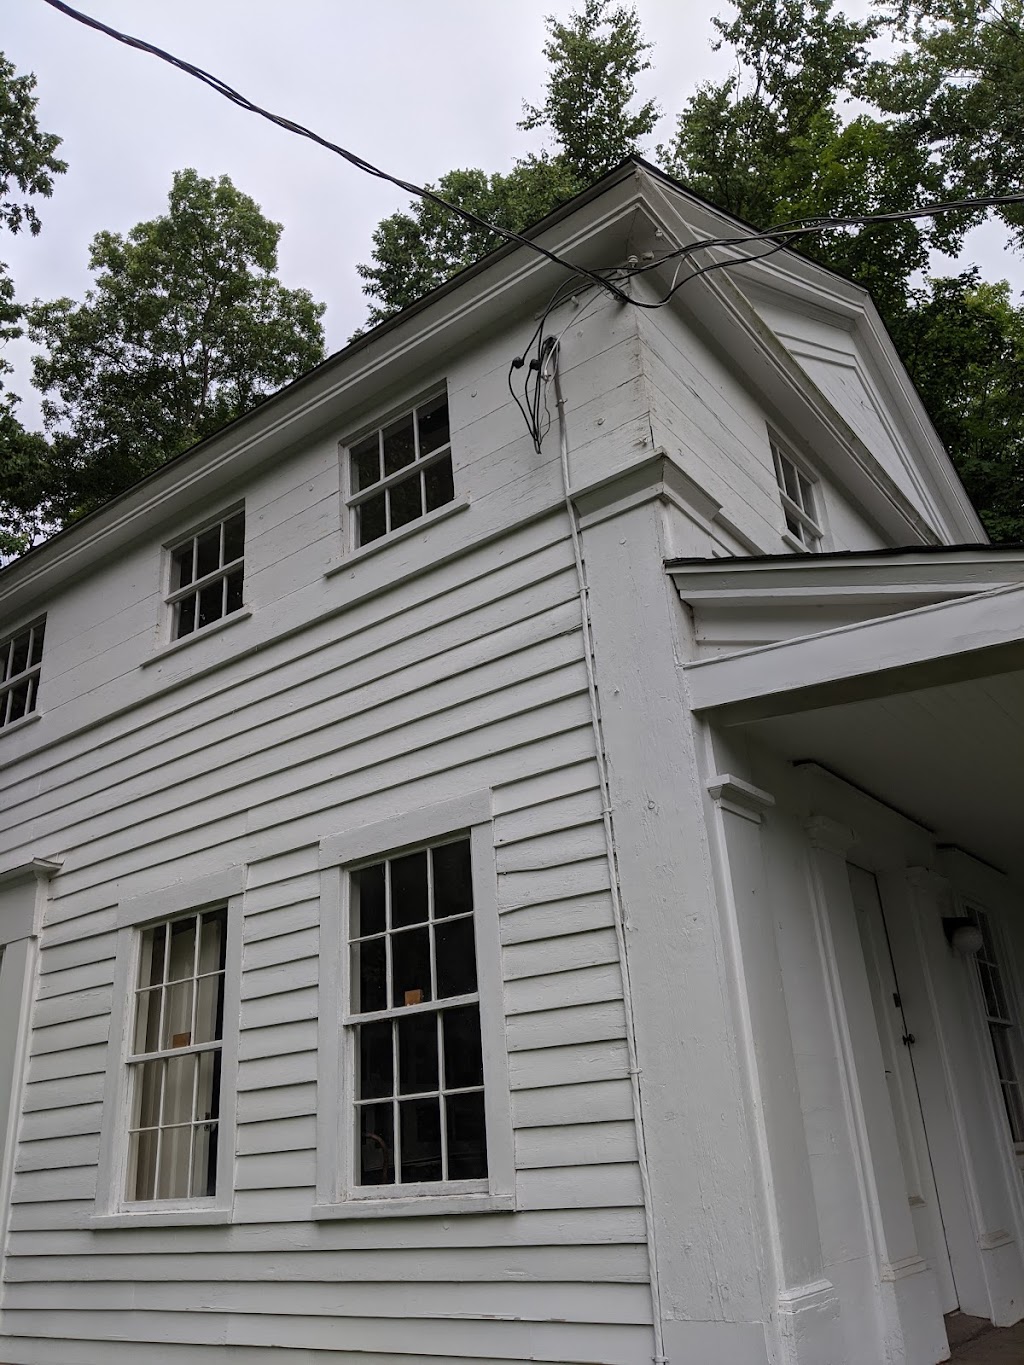 Hubbell House Museum | 33-39 Pembroke Rd, New Fairfield, CT 06812 | Phone: (203) 733-6826